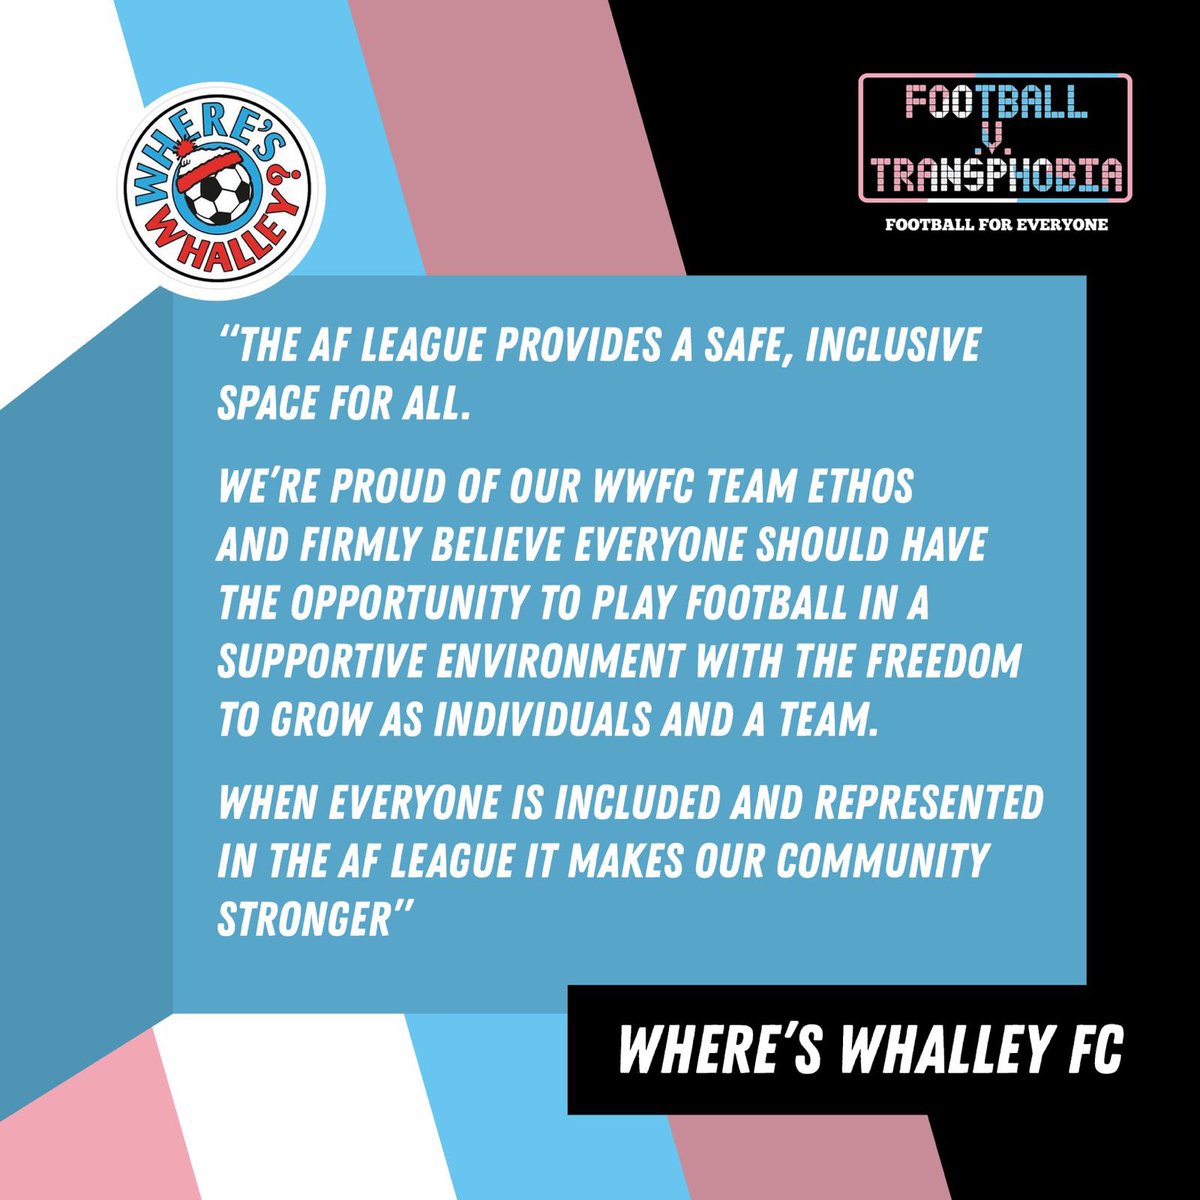 'The AF League provides a safe, inclusive space for all. We’re proud of our WWFC team ethos and firmly believe everyone should have the opportunity to play football in a supportive environment with freedom to grow as individuals and a team….